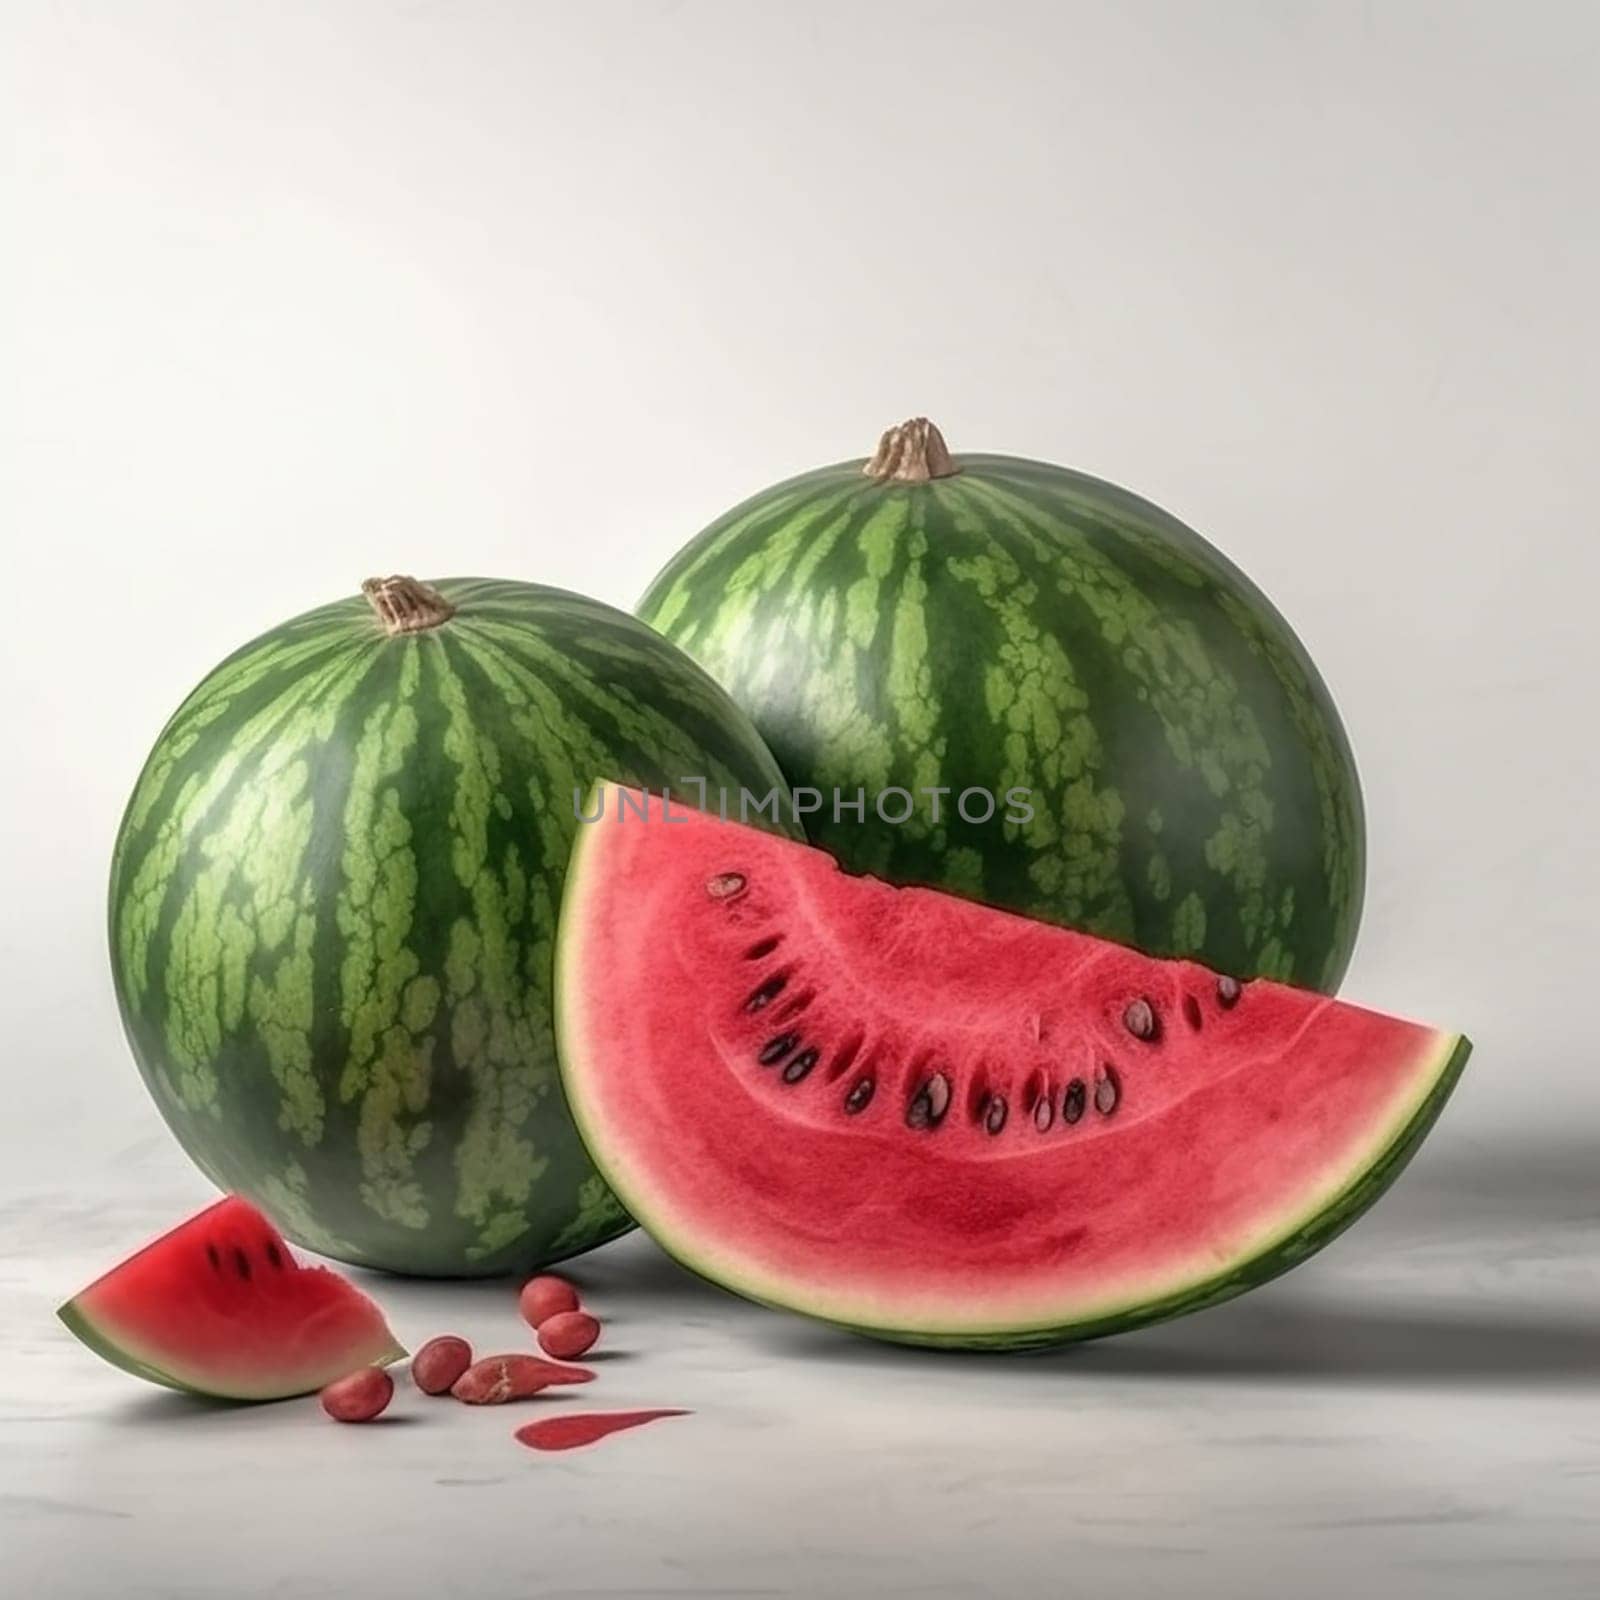 Two whole watermelons and a juicy slice with seeds by Hype2art